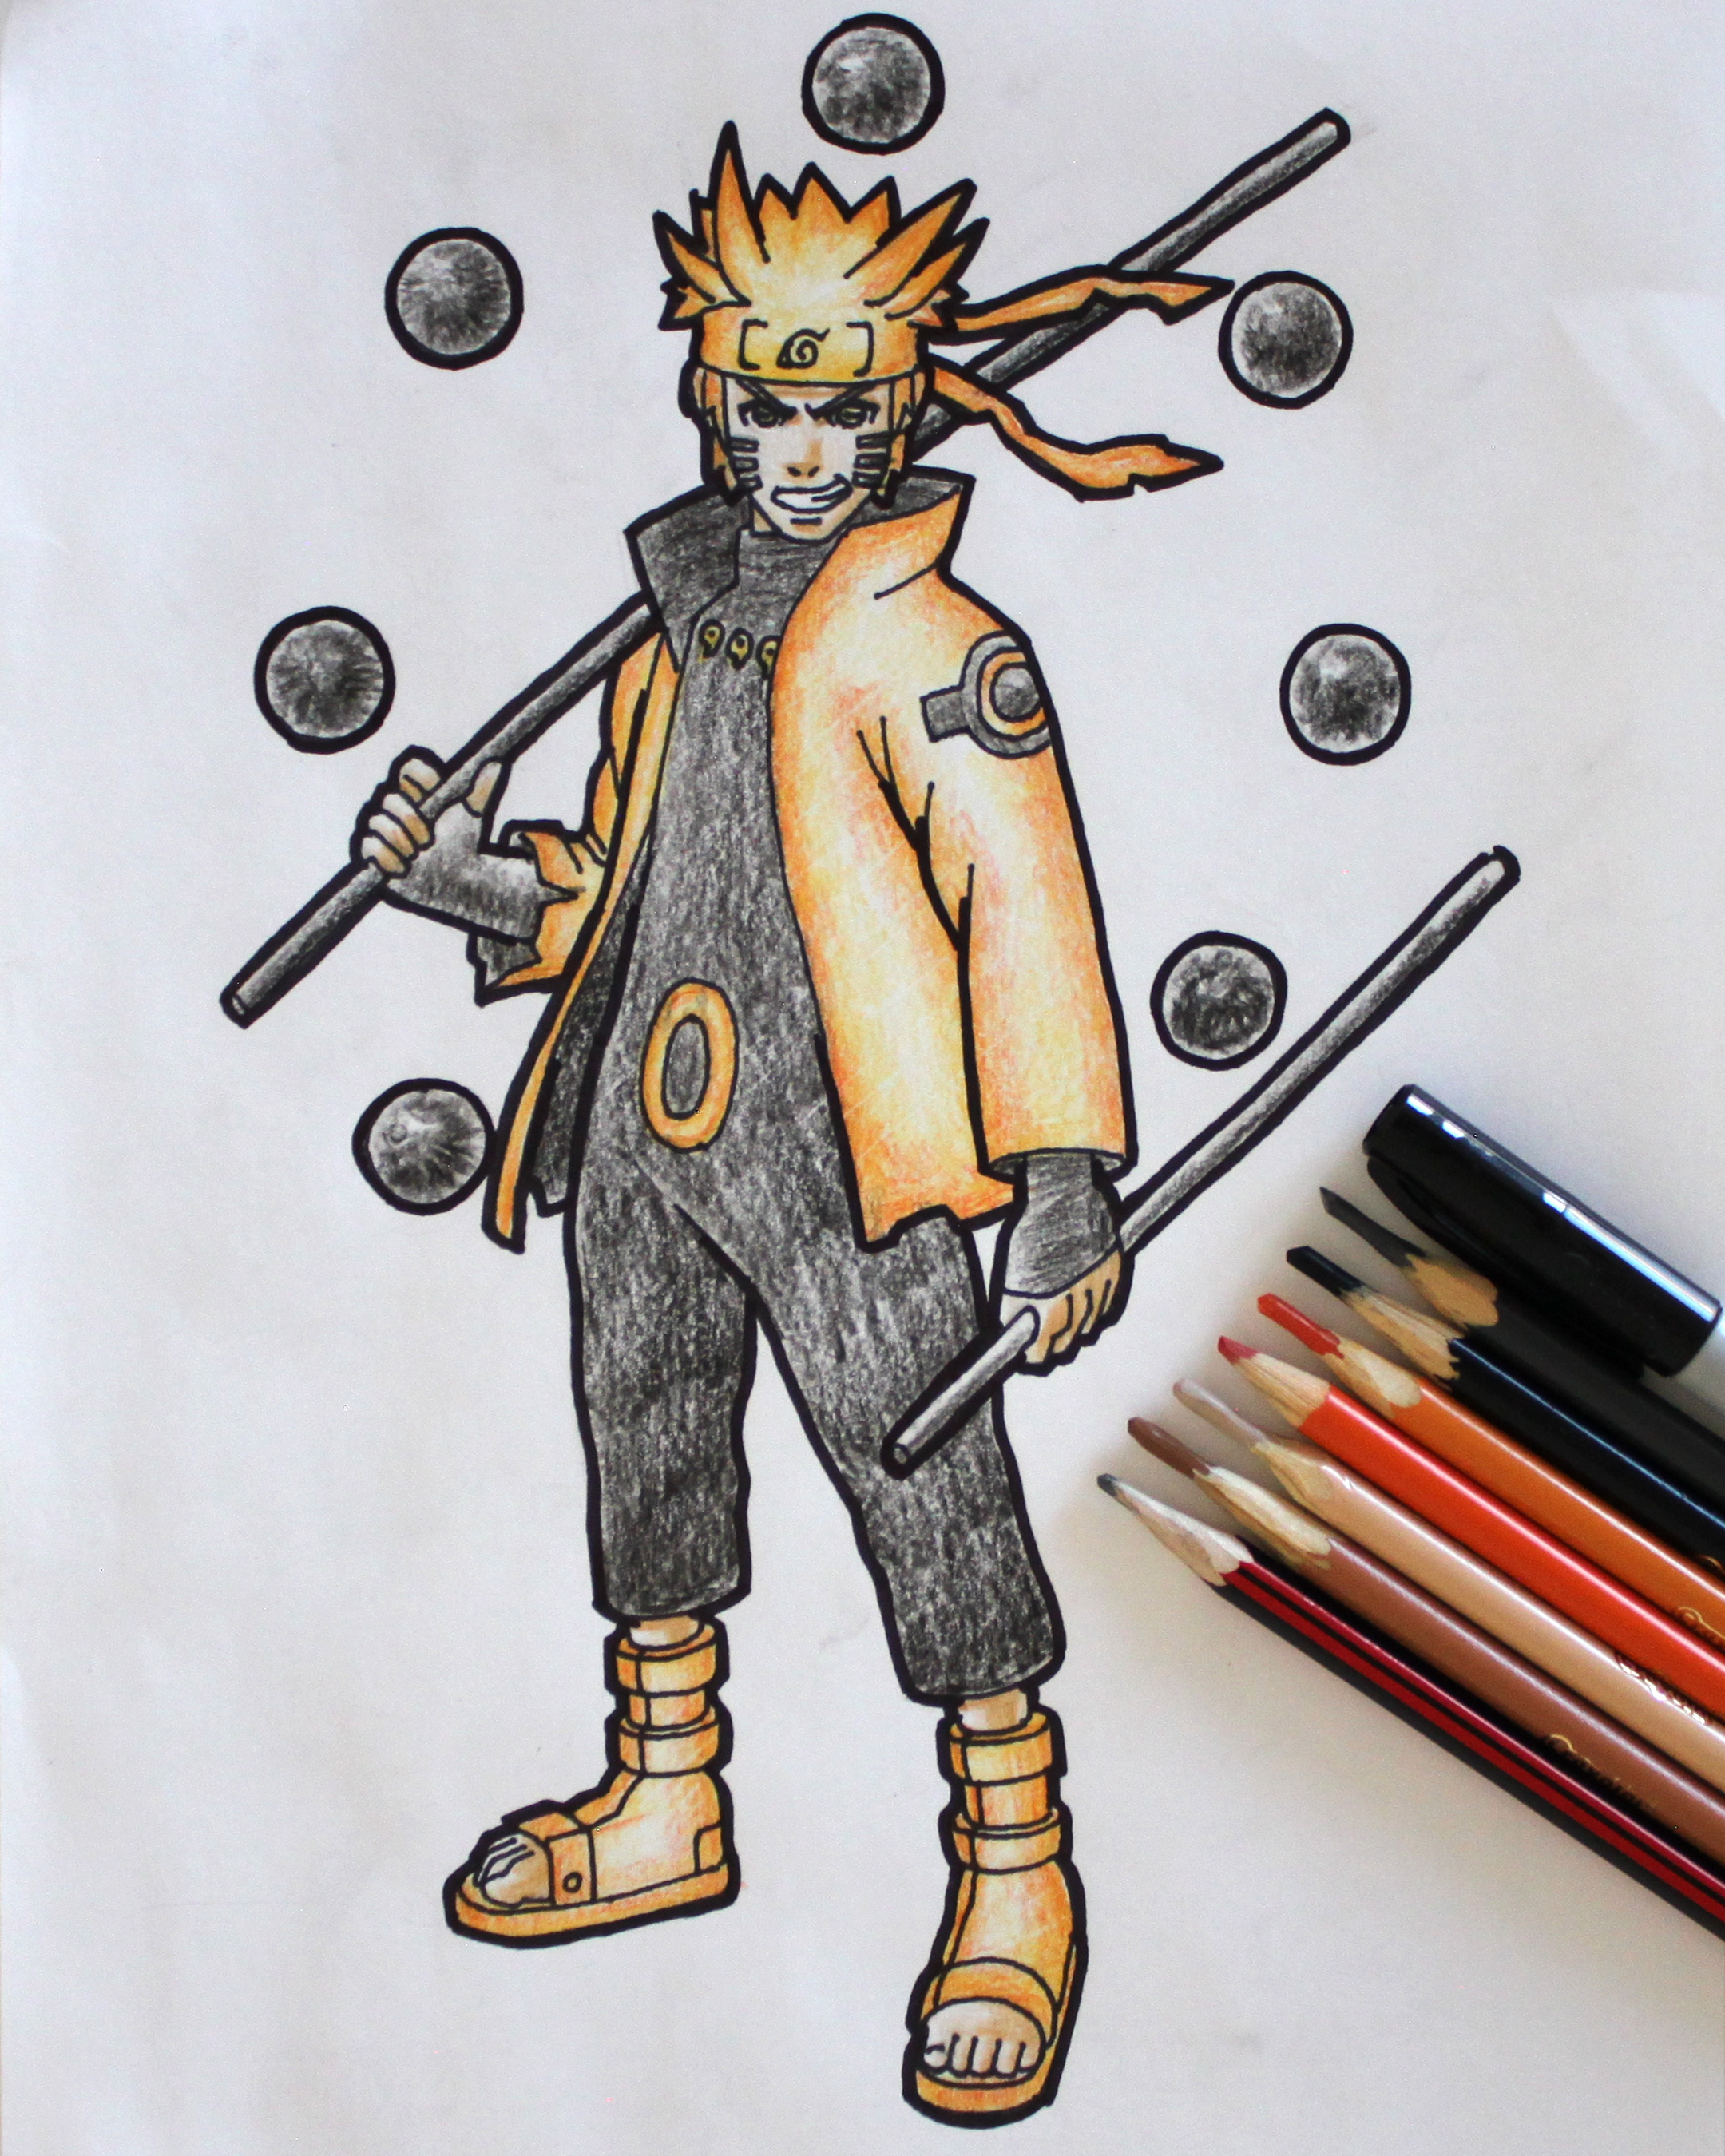 How to draw guide – learn how to draw » Learn to draw Naruto in 6